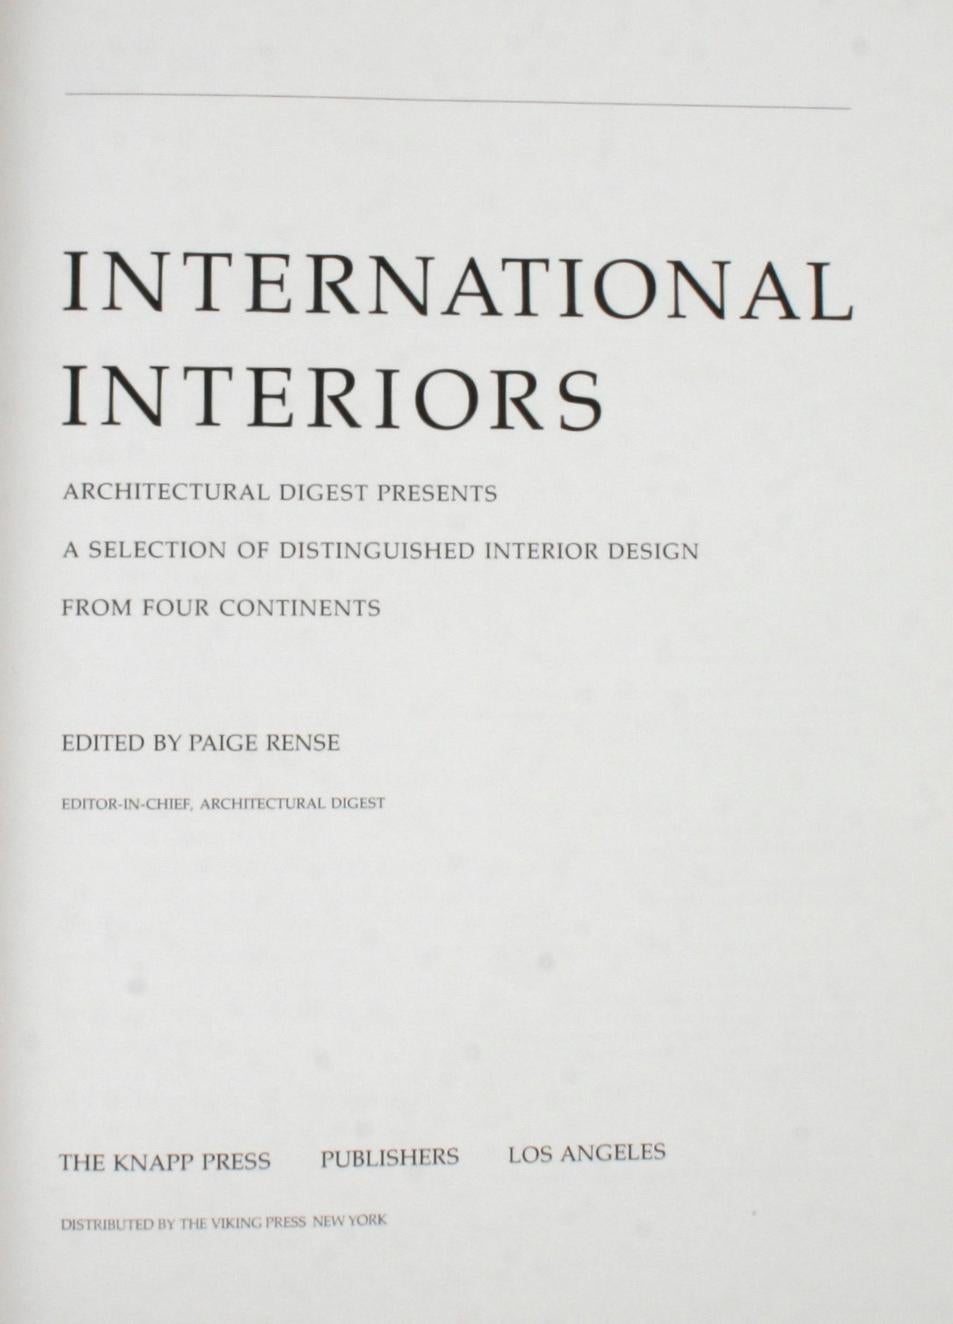 Architectural Digest International Interiors, Stated First Edition. Los Angeles, The Knapp Press Publishers, 1979. Stated first edition hardcover with dust jacket. 287 pp. Selection of international interior design from four continents including a